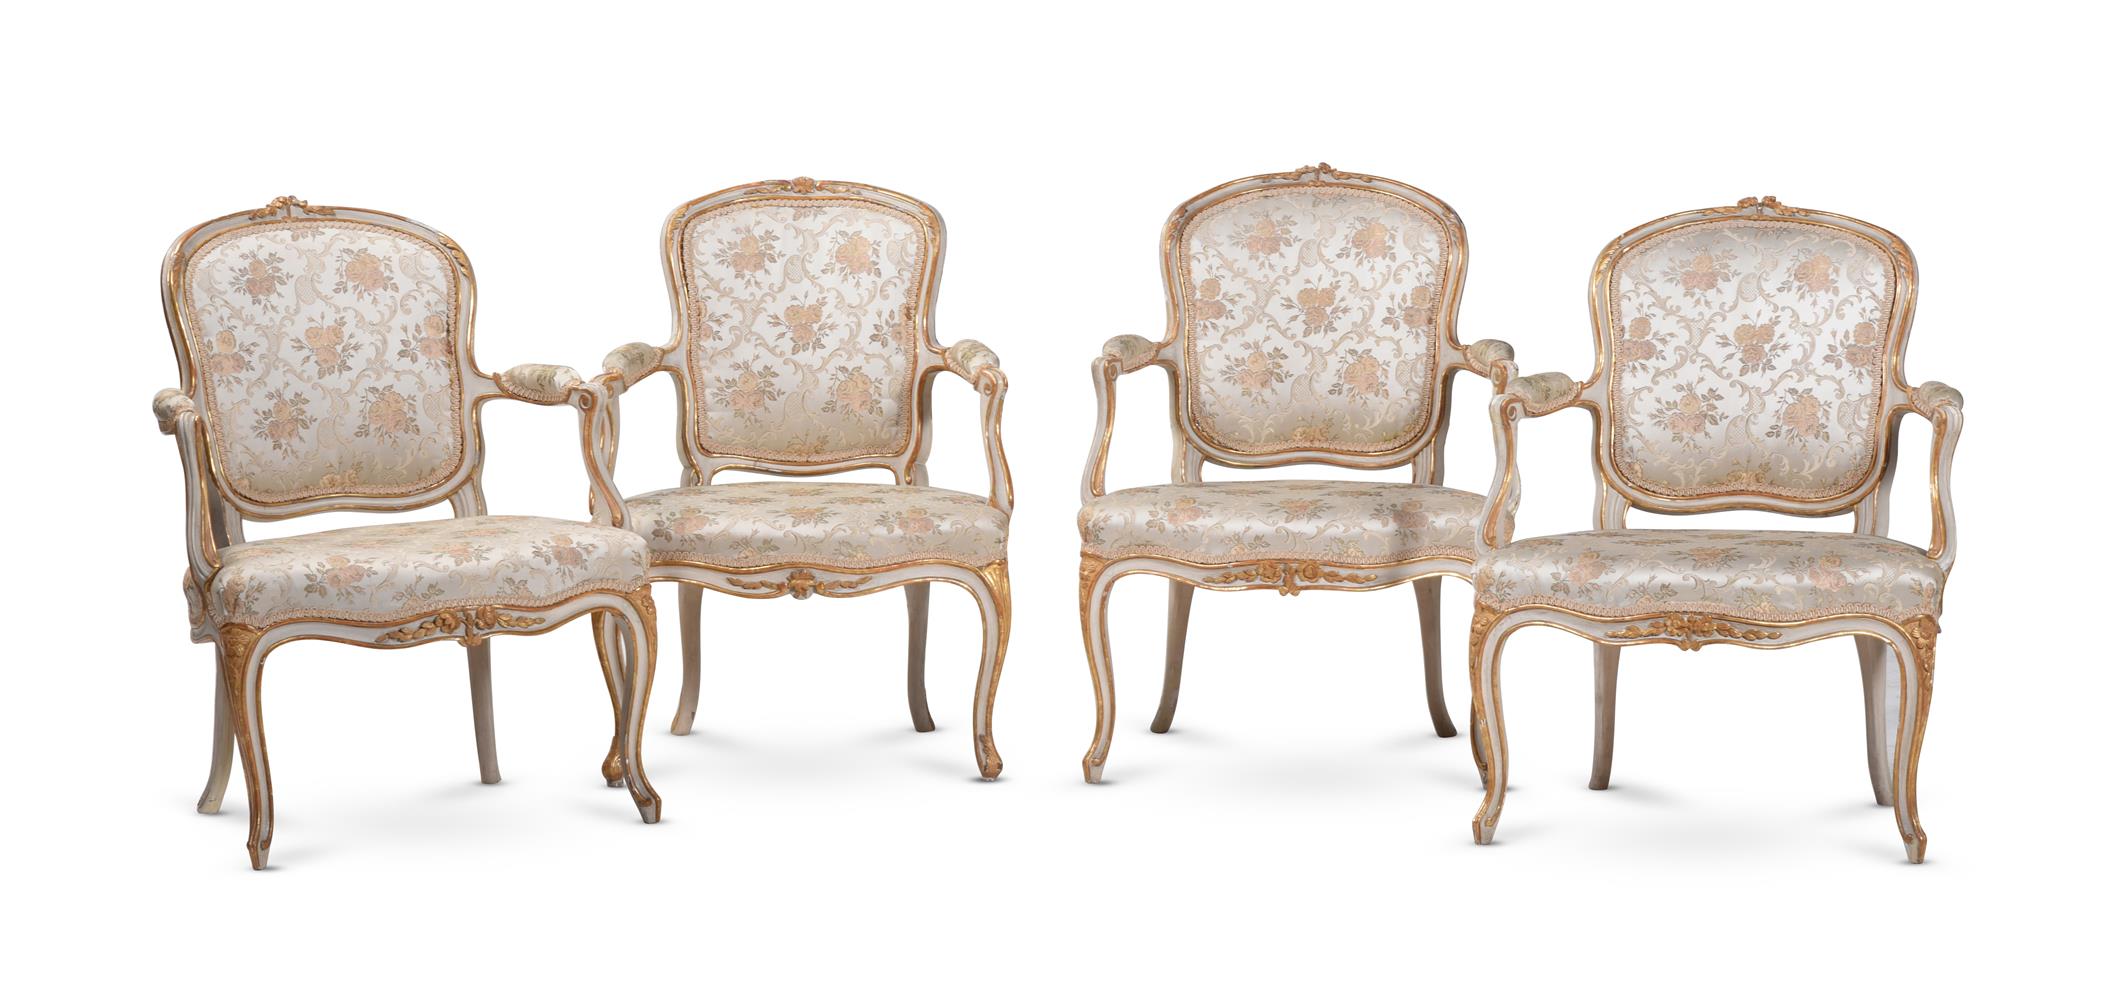 A SET OF THREE LOUIS XV PAINTED AND PARCEL GILT FAUTEUILS, THIRD QUARTER 18TH CENTURY